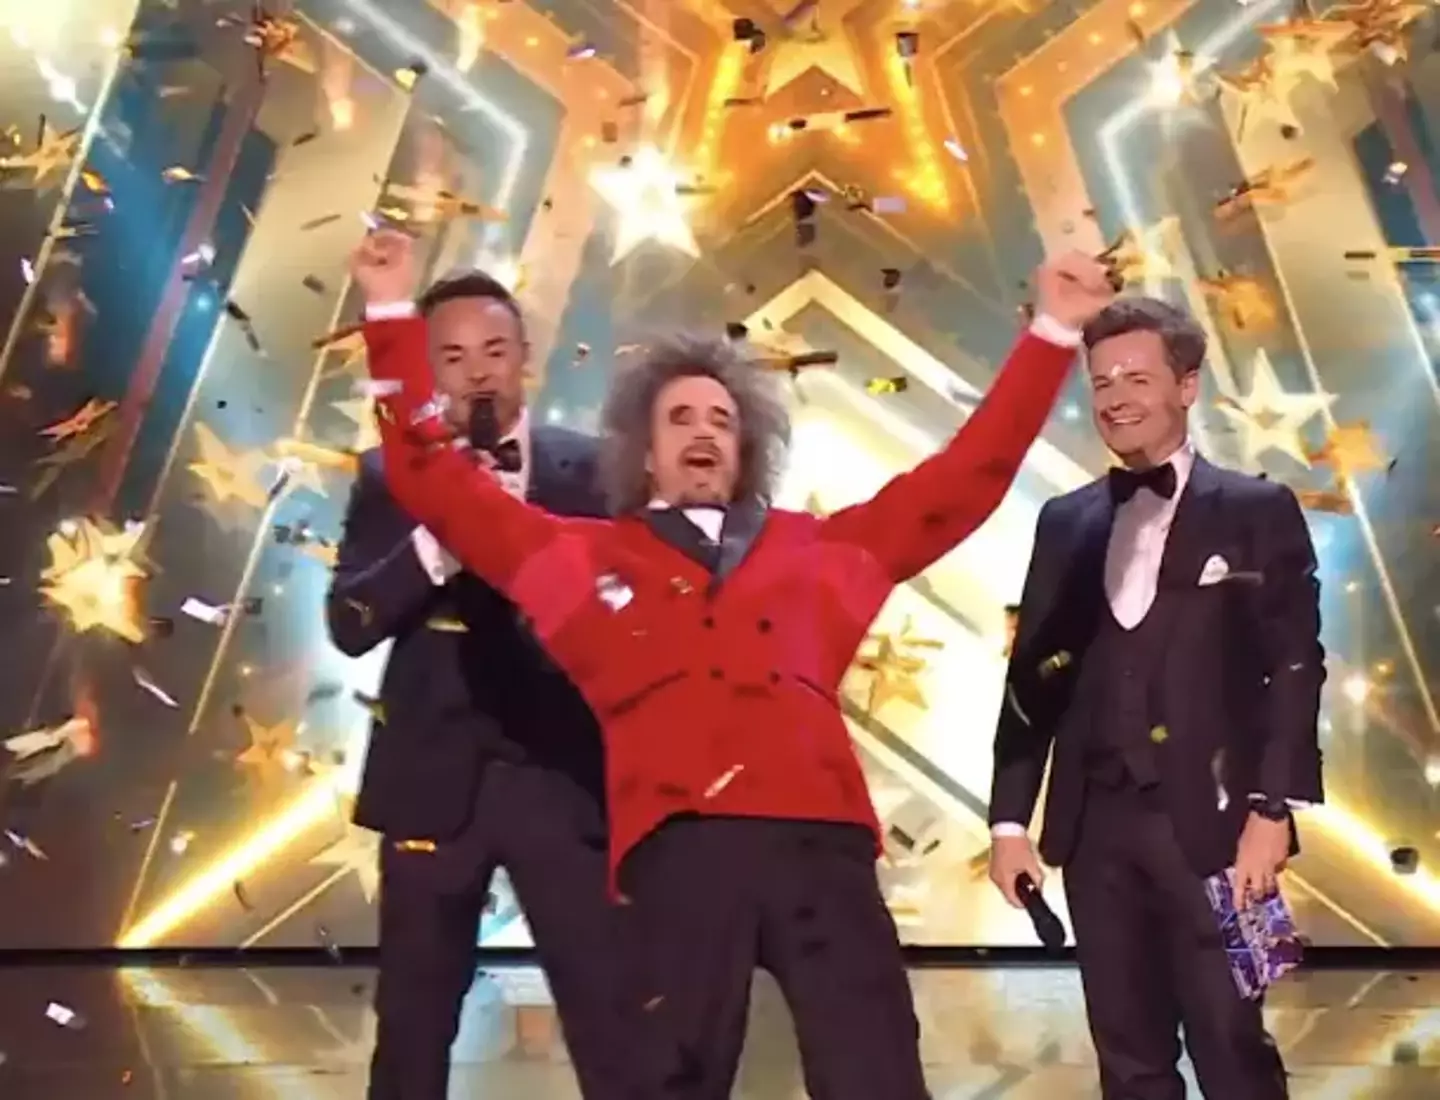 Some Britain's Got Talent viewers weren't happy with the eventual winner.